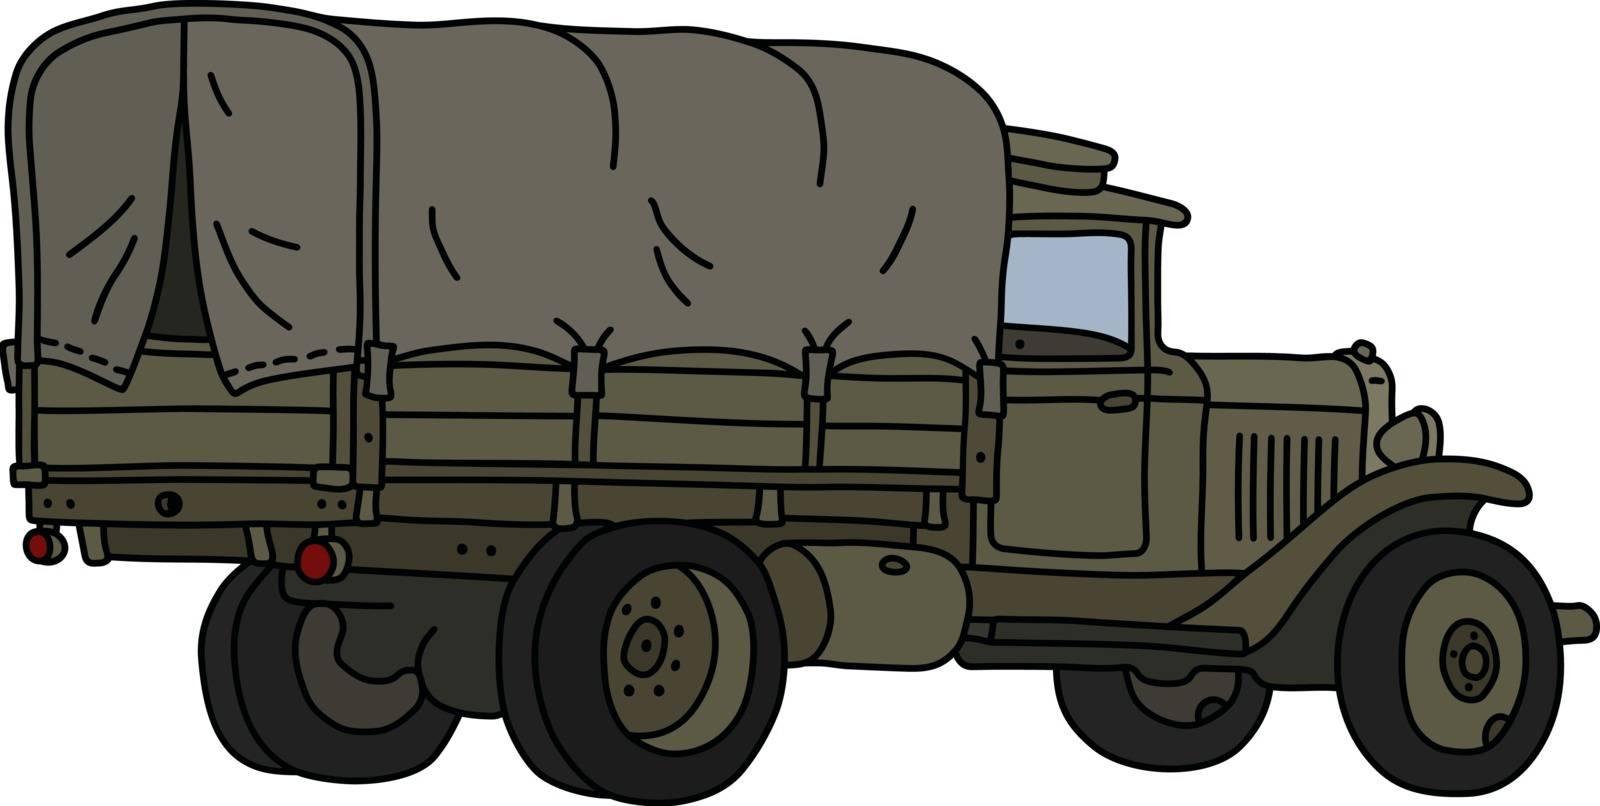 The vectorized hand drawing of an old khaki military truck